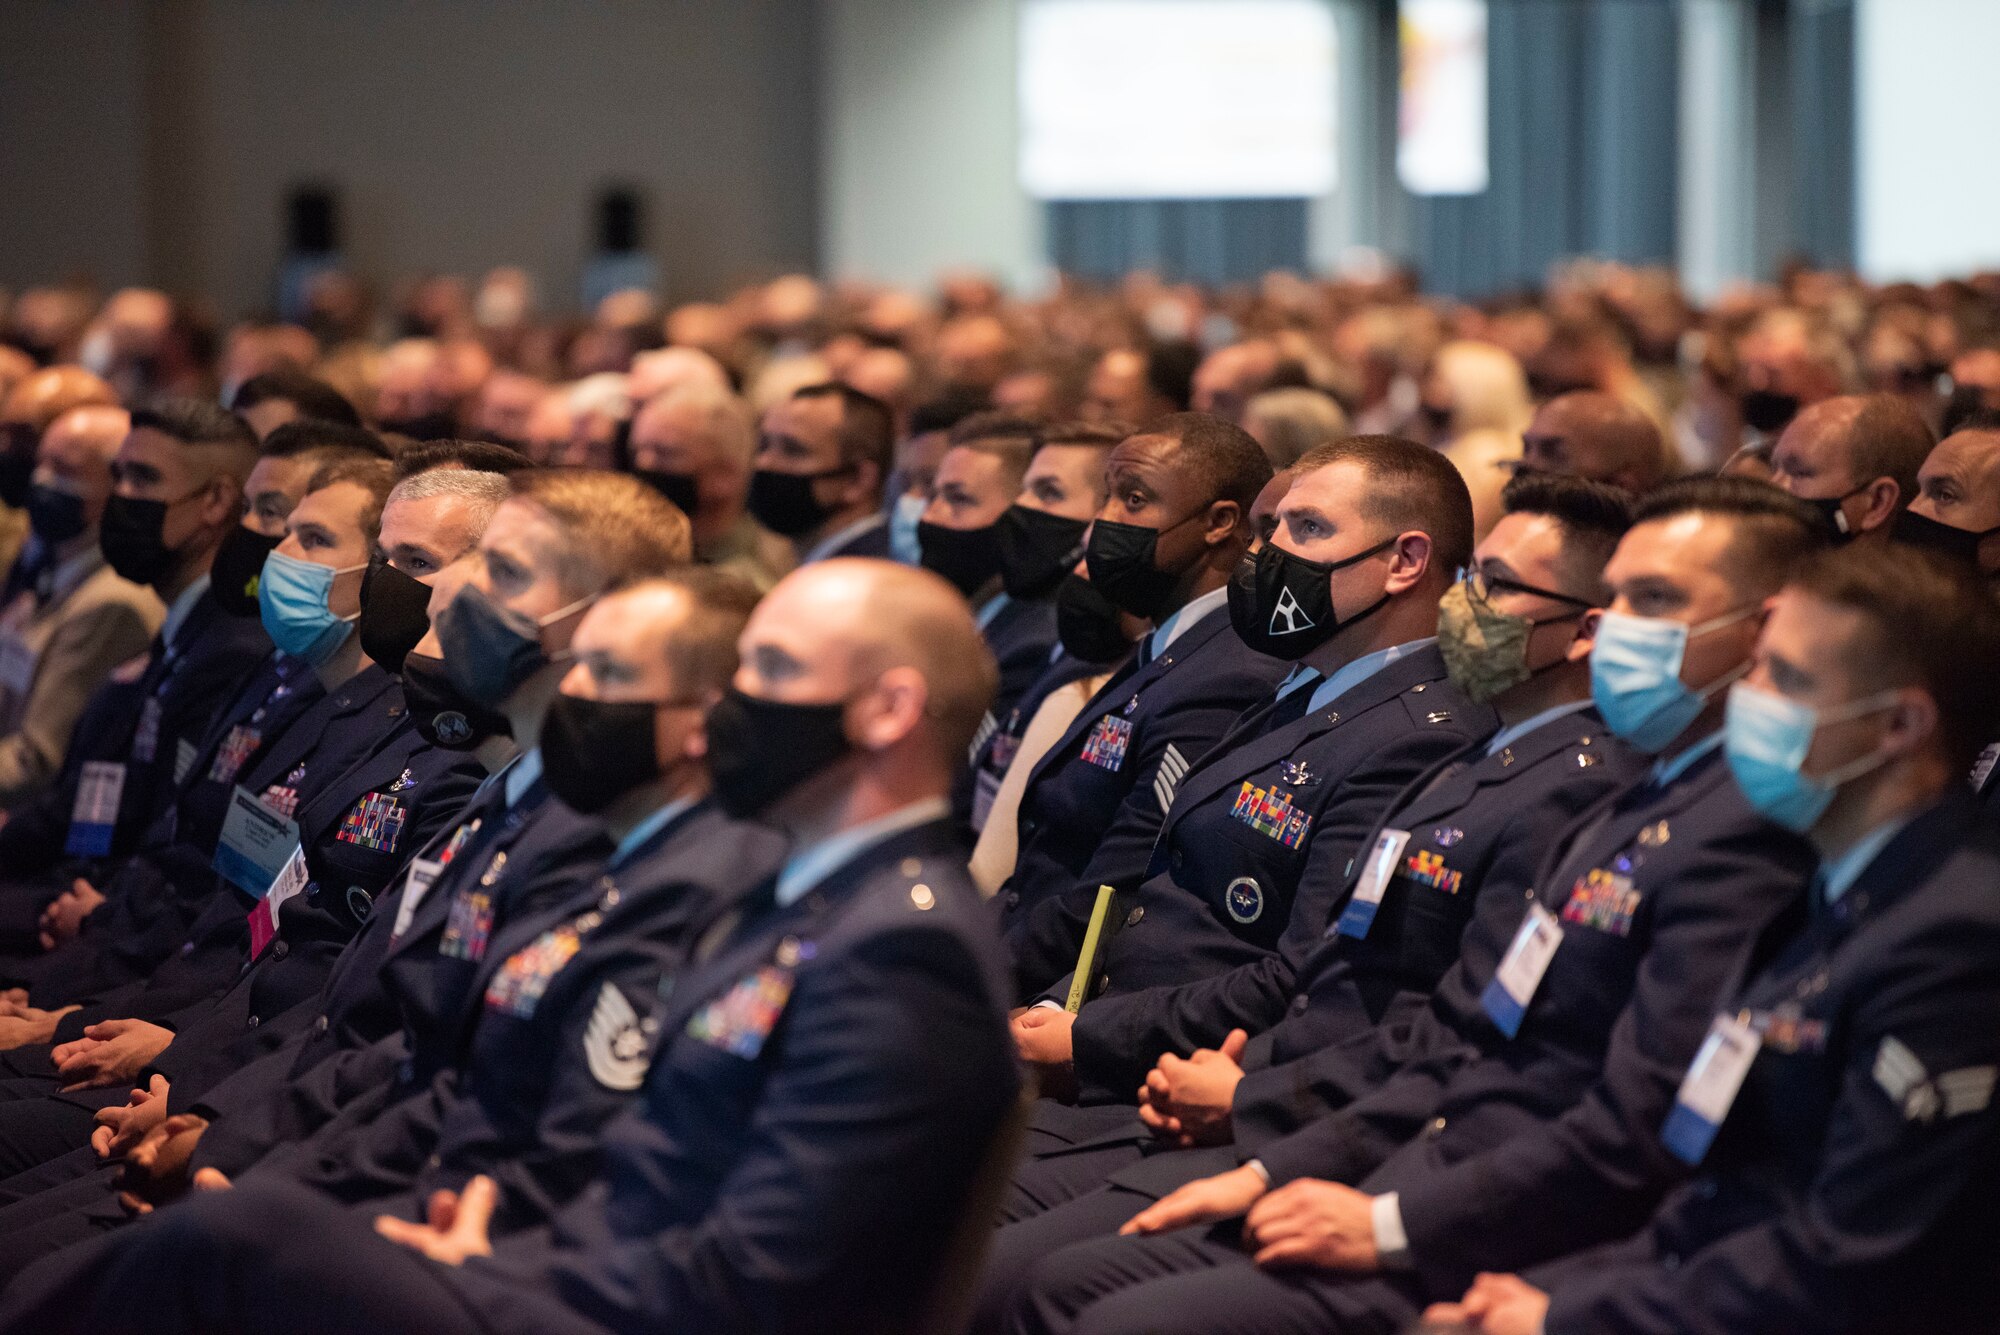 U.S. Air Force airmen attend Air Mobility Command commander Gen. Mike Minihan’s keynote speech during the 53rd Airlift/Tanker Association Convention in Orlando, Florida, Oct. 28th, 2021.